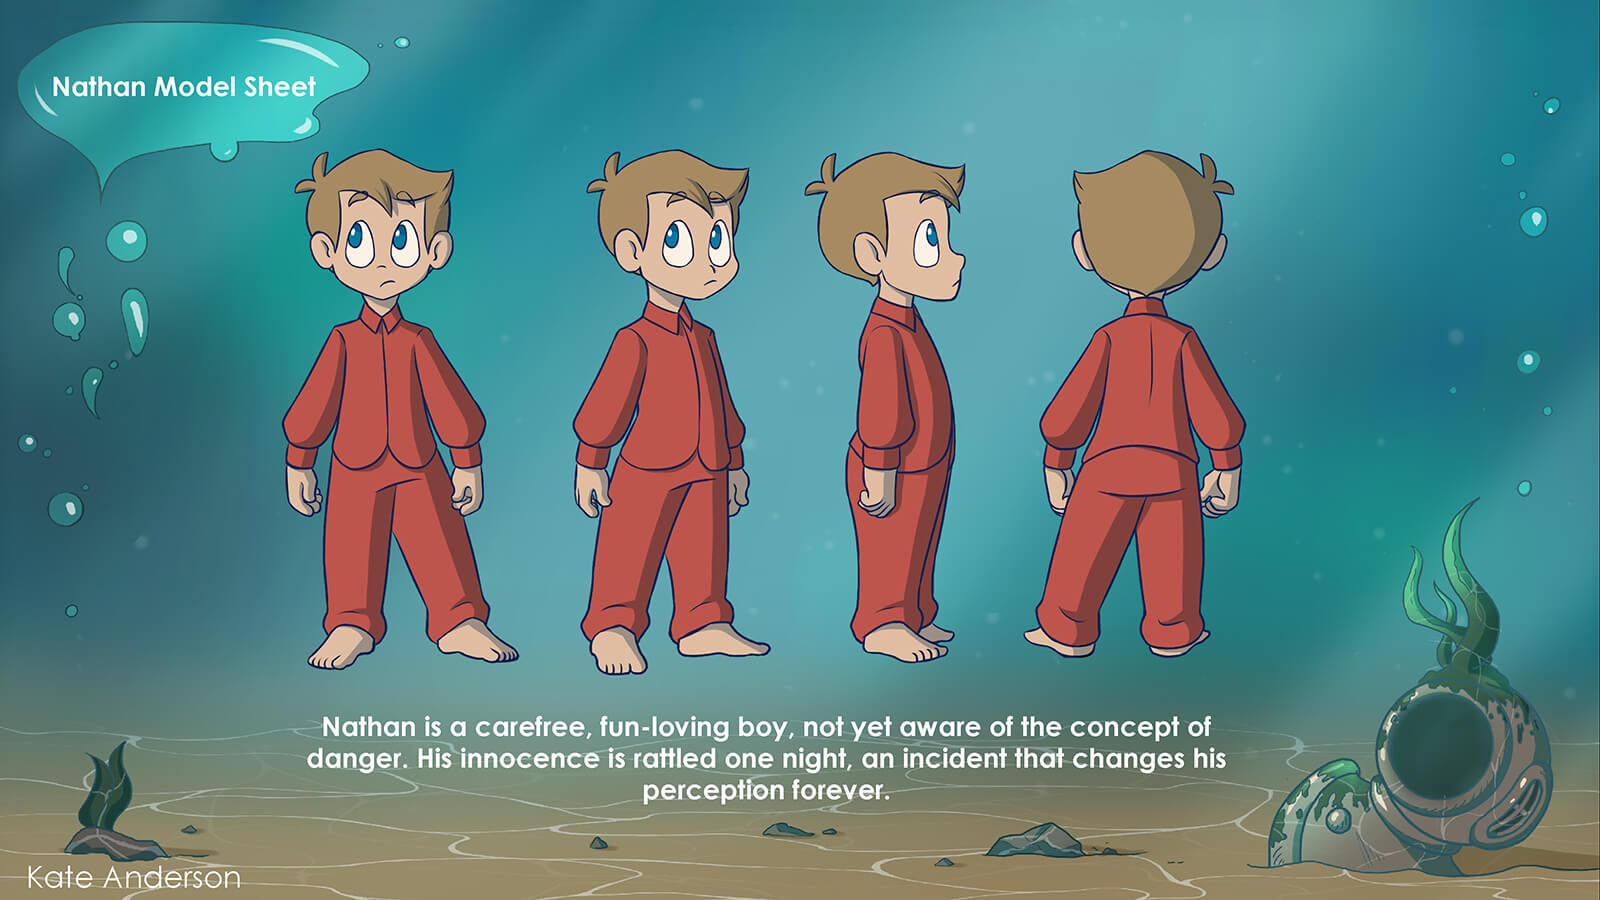 Turnaround and character description for Nathan